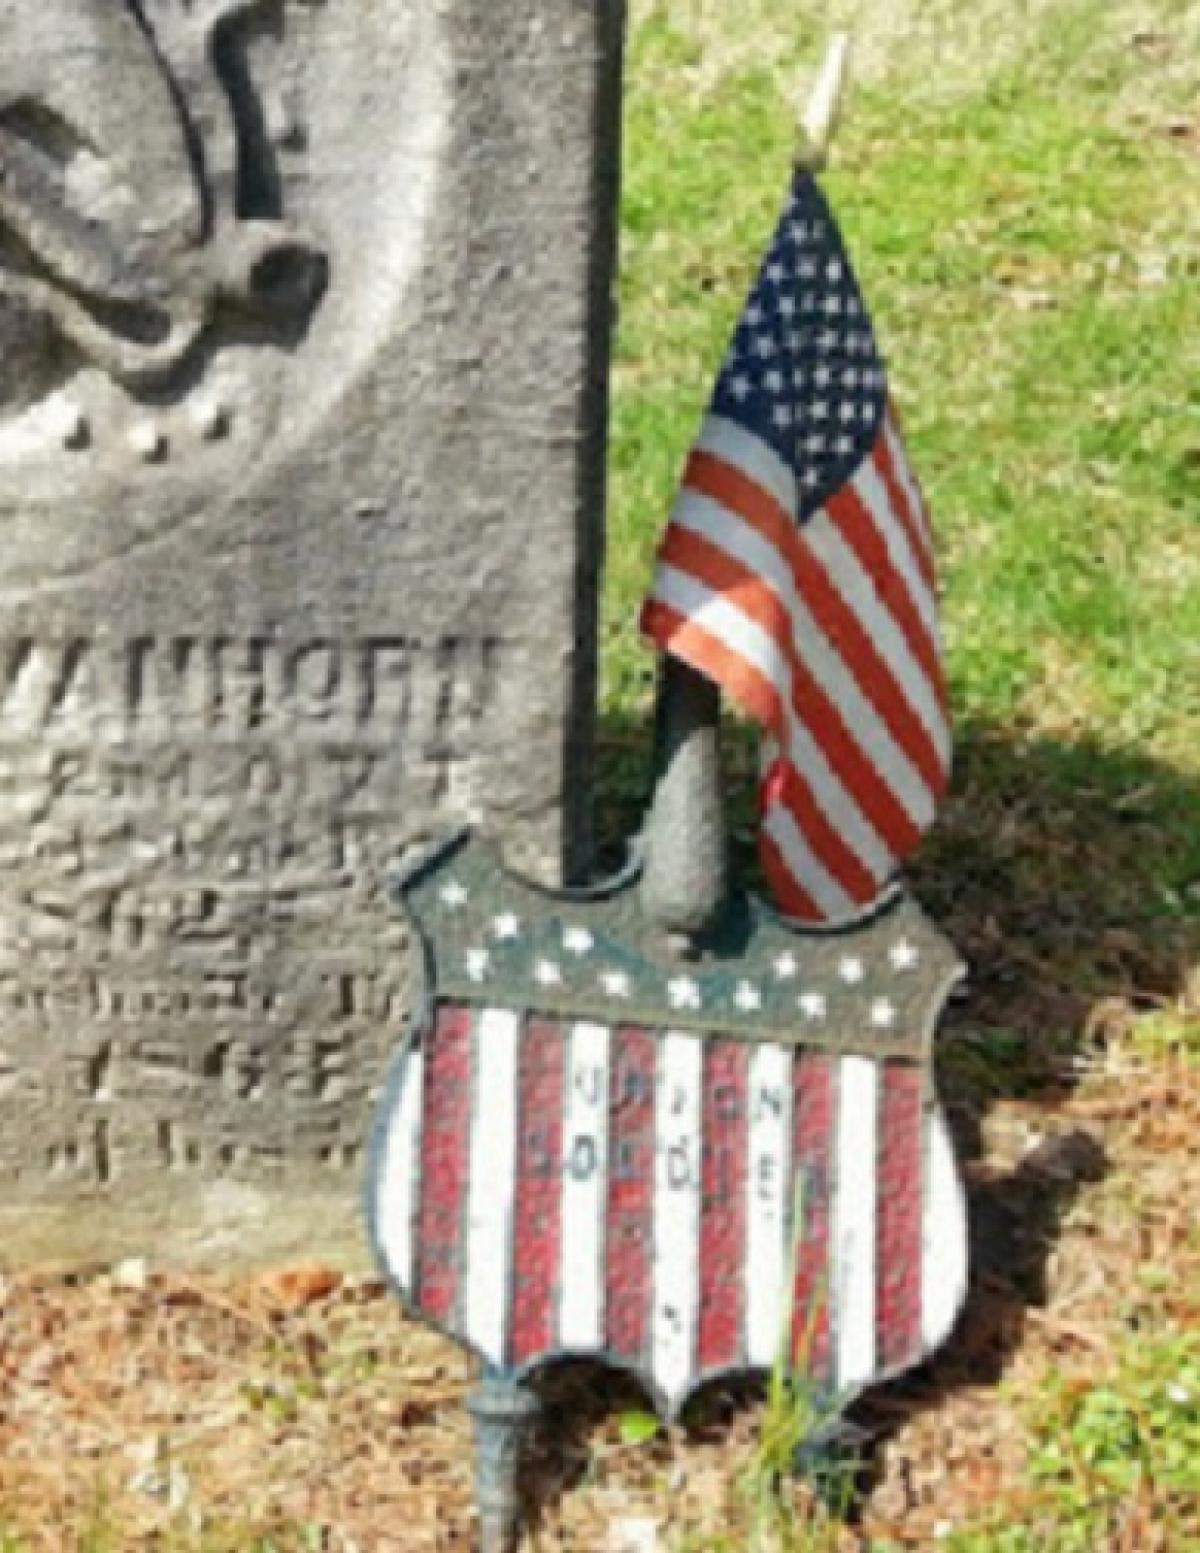 OK, Grove, Headstone Symbols and Meanings, Civil War Union Flag